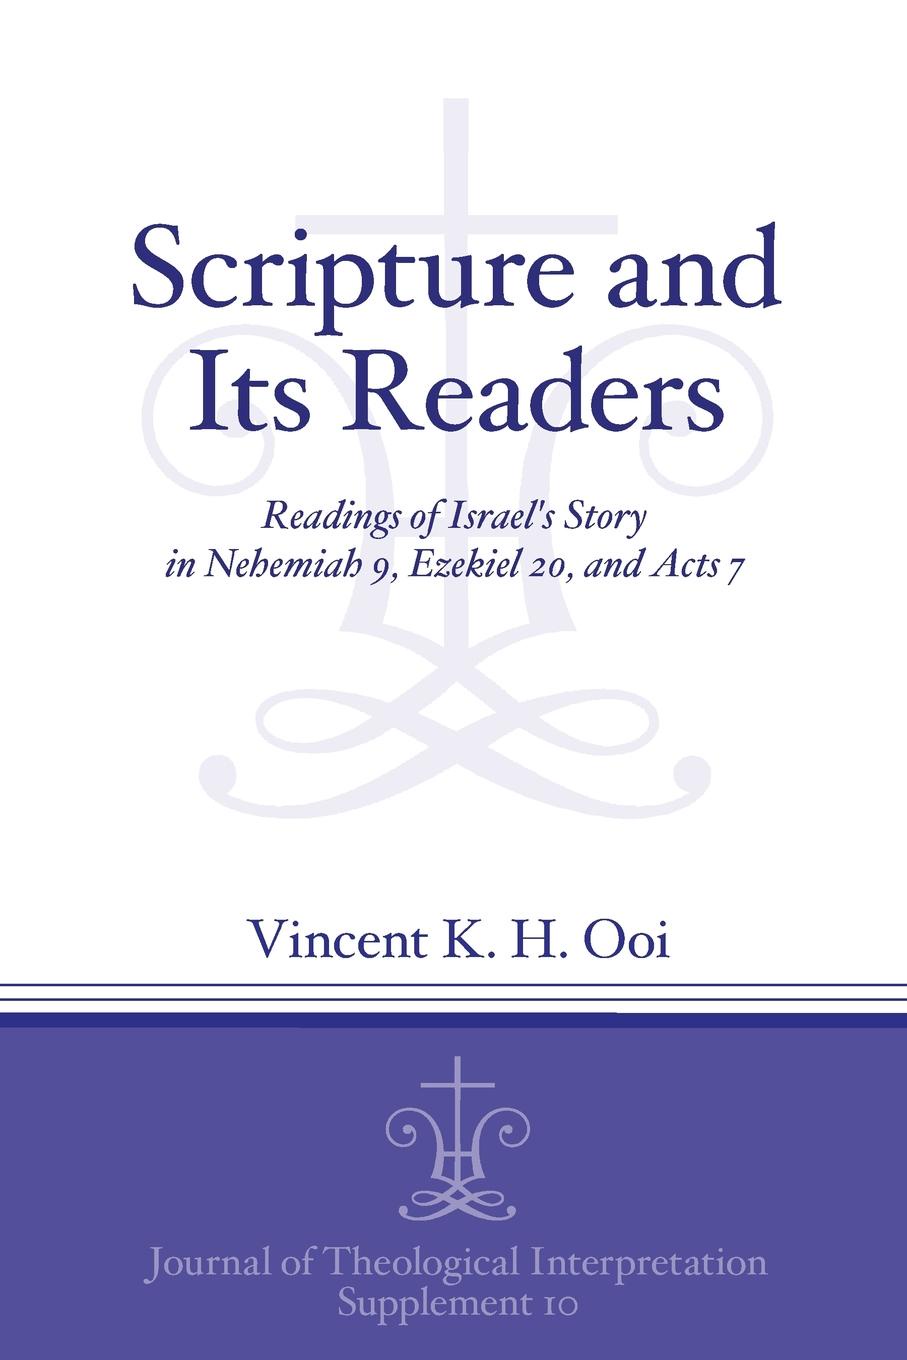 Scripture and Its Readers. Readings of Israel.s Story in Nehemiah 9, Ezekiel 20, and Acts 7